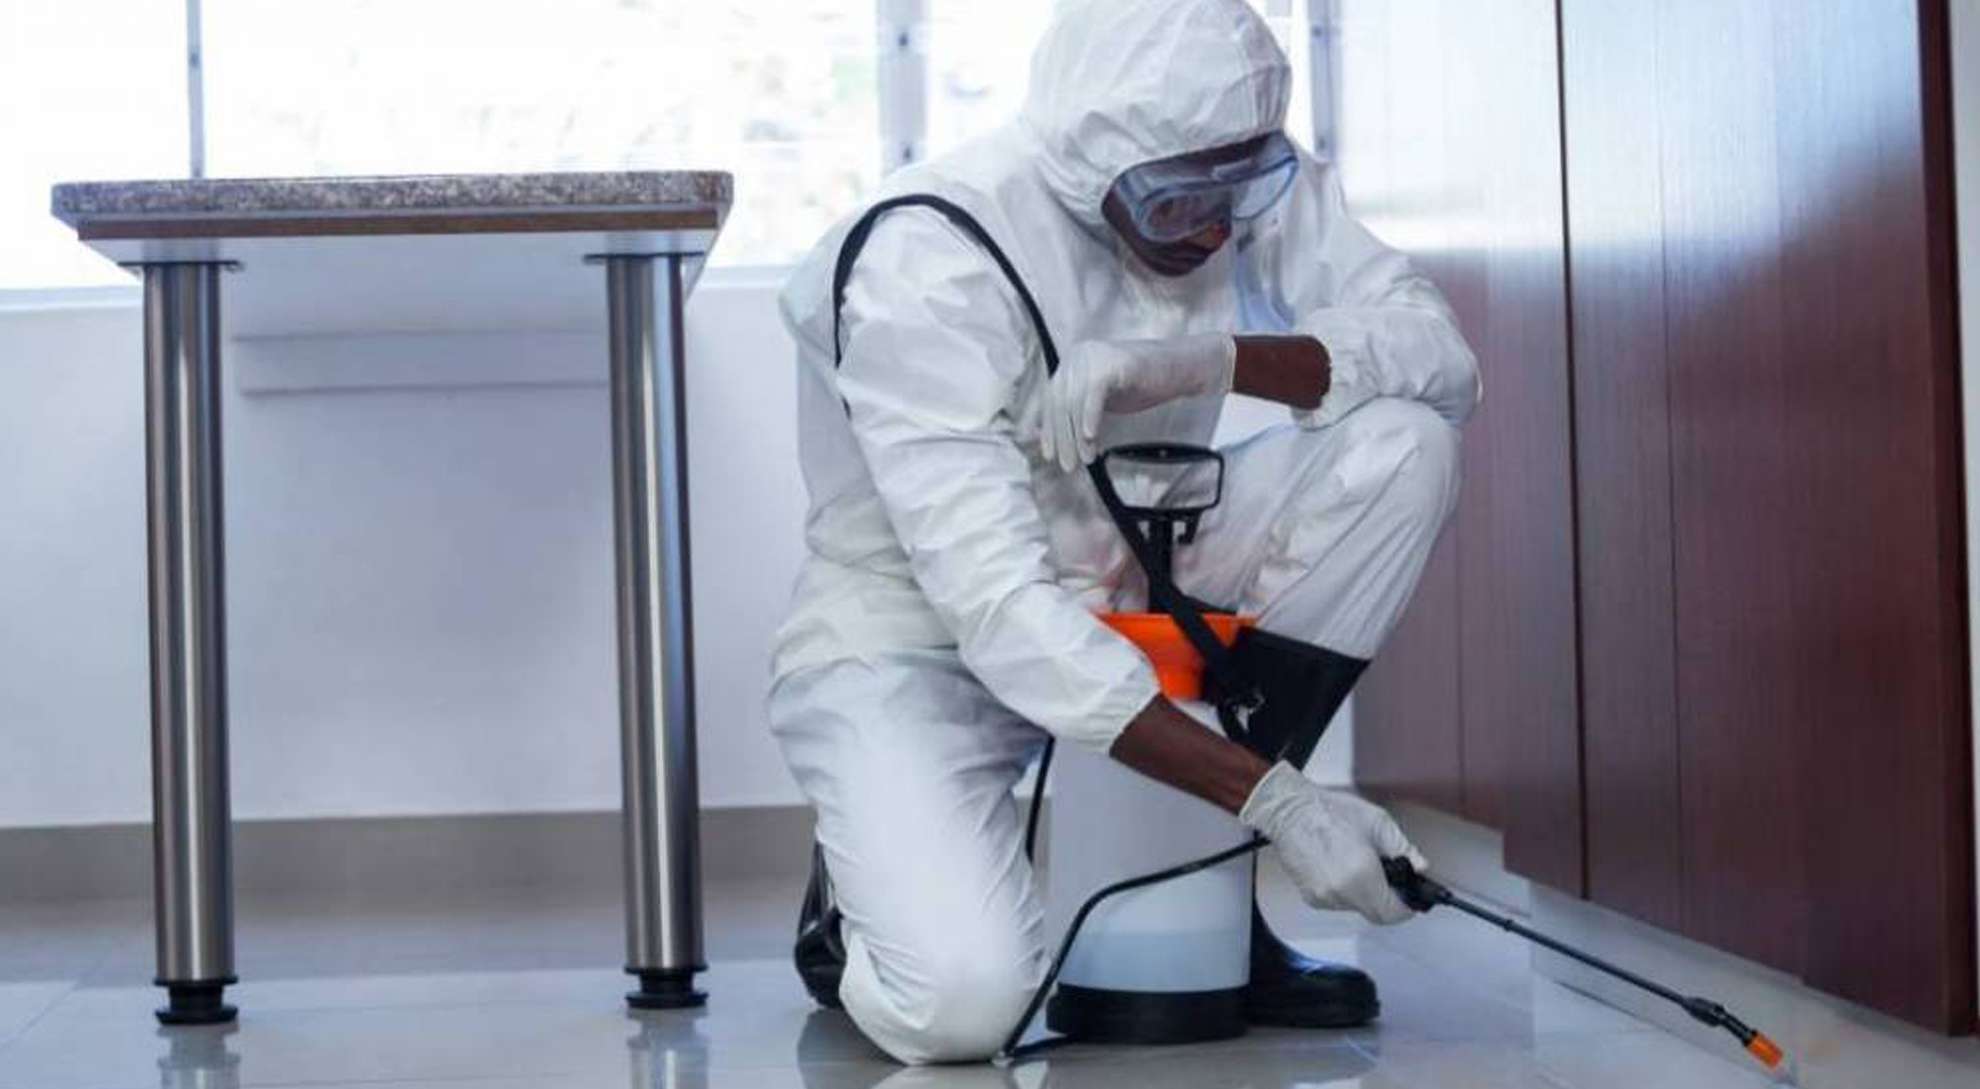 pest control expert providing extermination services in a clean commercial building